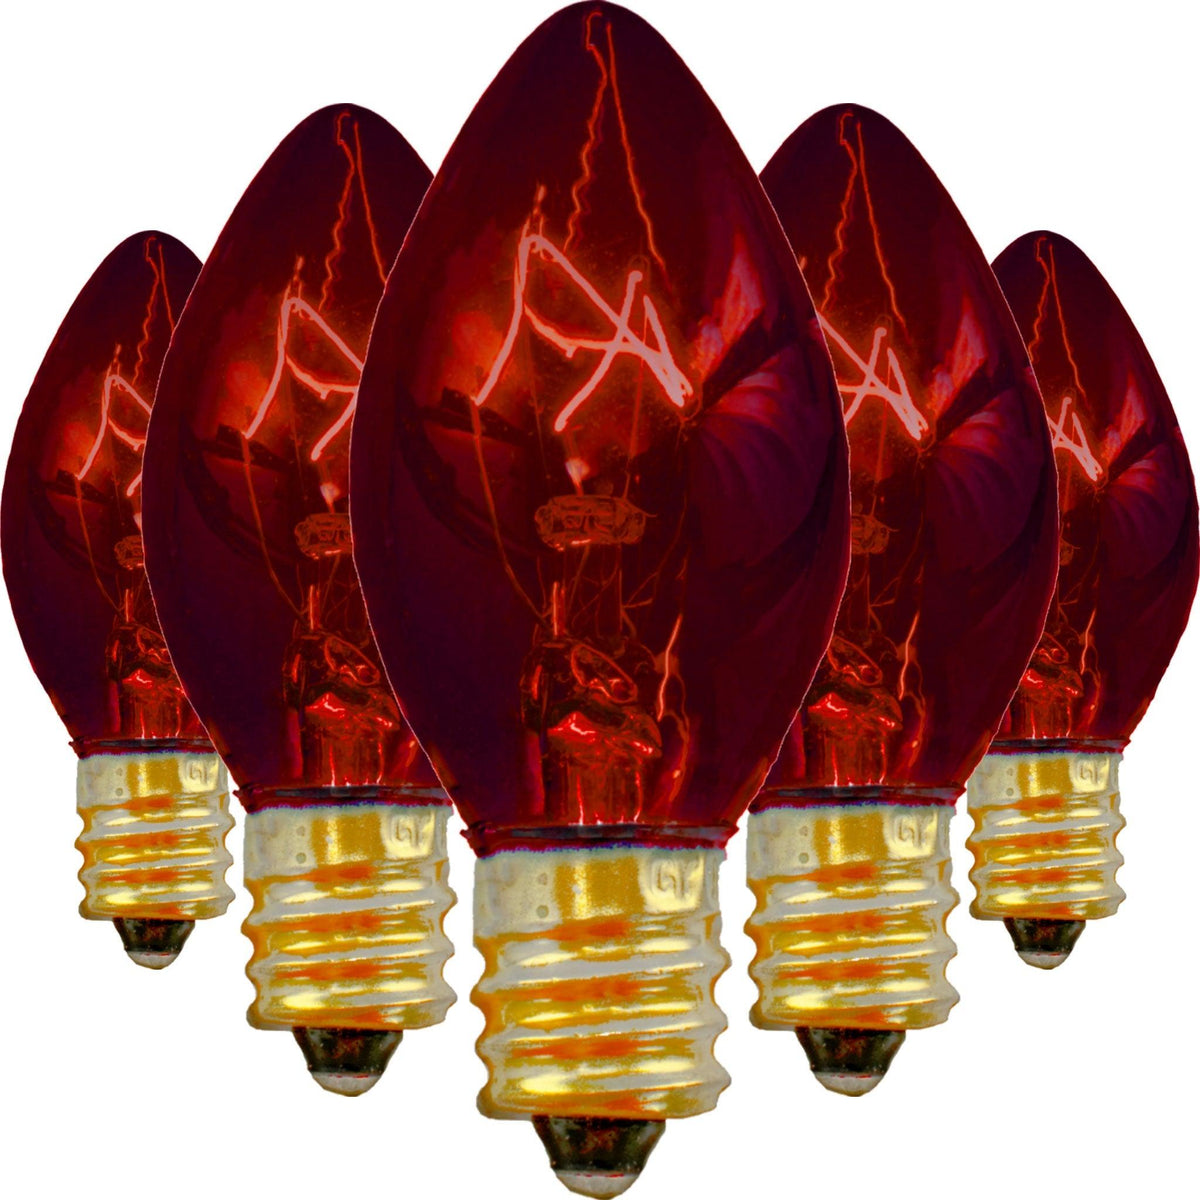 C-7 & C-9 Red Christmas Light Bulbs.  Replace your old bulbs with a set of brand new Candelabra Red Lights on sale at leedisplay.com